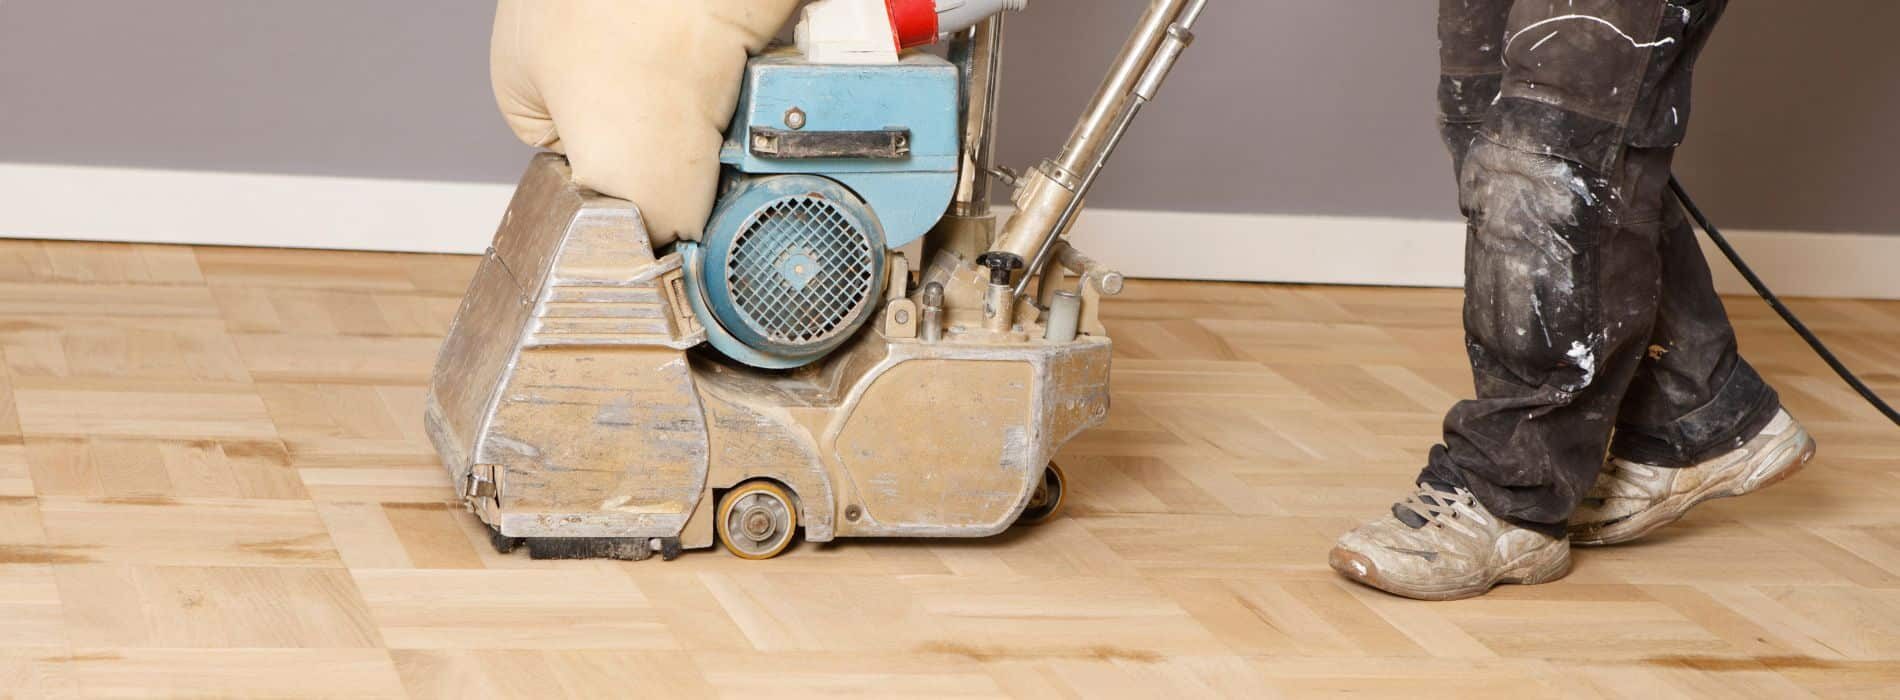 A Mr Sander® skilfully operates an Orebro 10 inch x 750mm floor sander on a 14mm 4-finger oak parquet block floor in Kingston, utilizing a medium 60 grit endless ceramic belt for optimal results and an even finish.